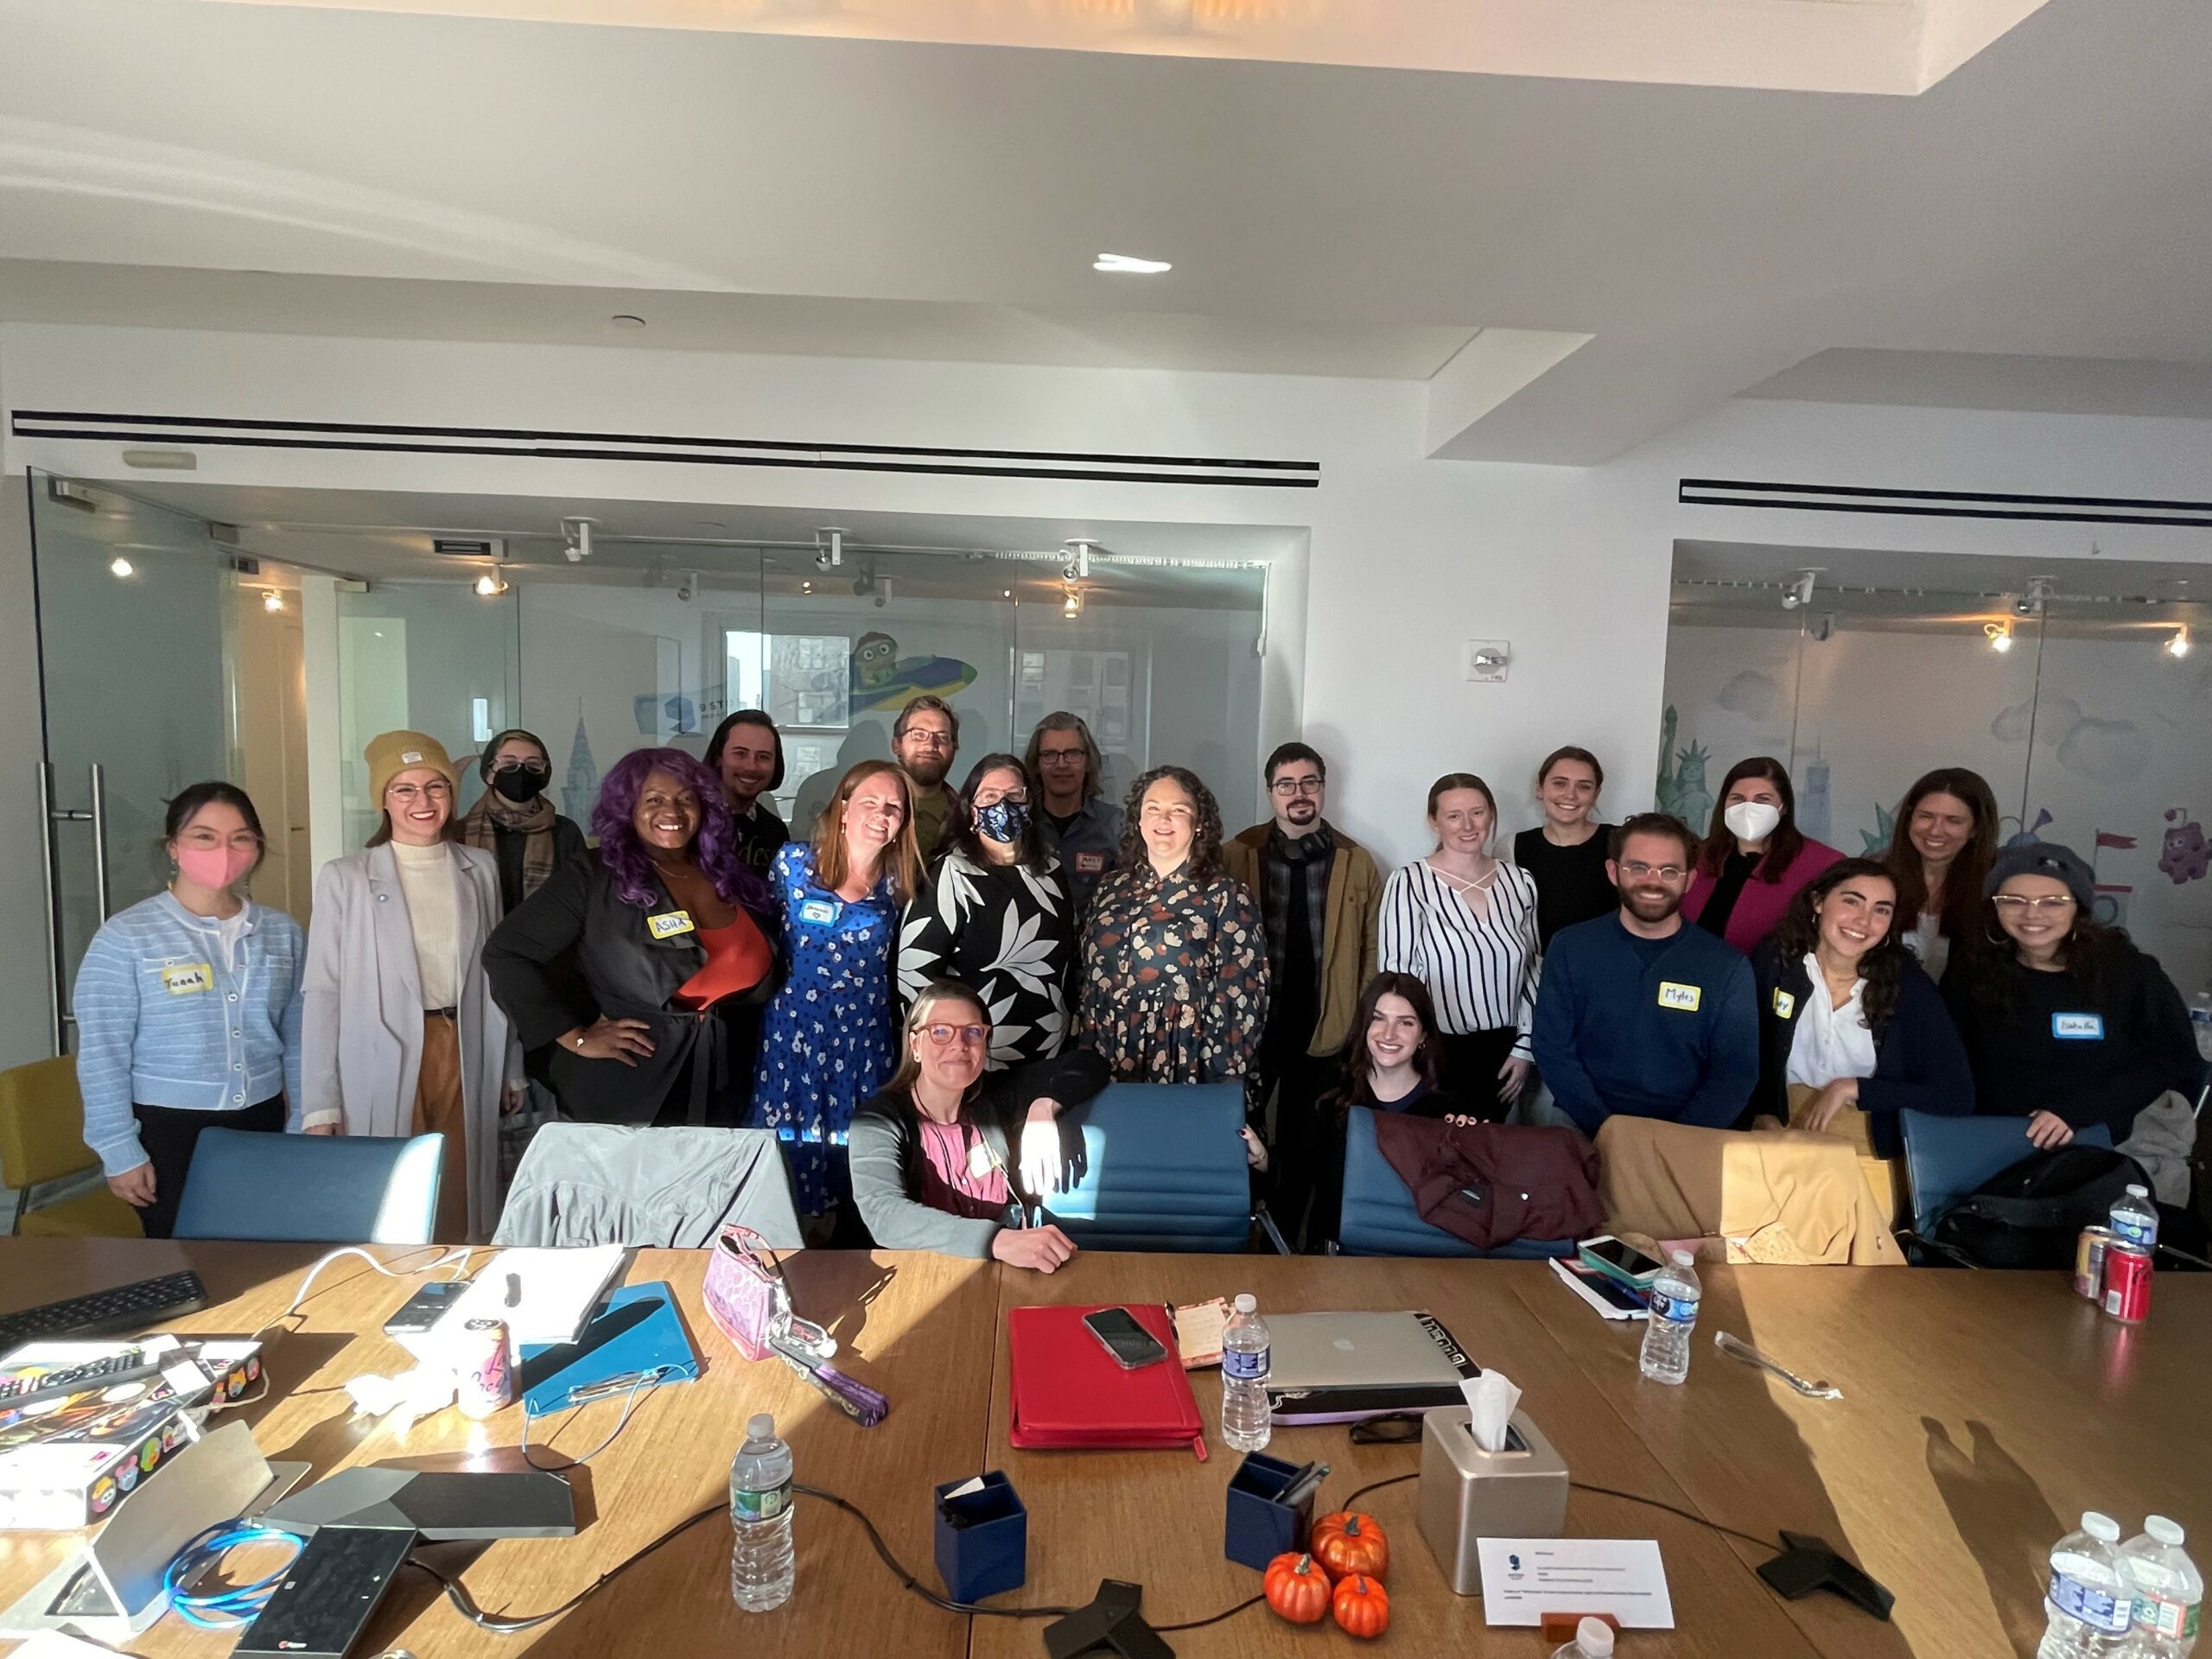 Group image of the Children's Content Lab participants in 9 Story board room in New York City.